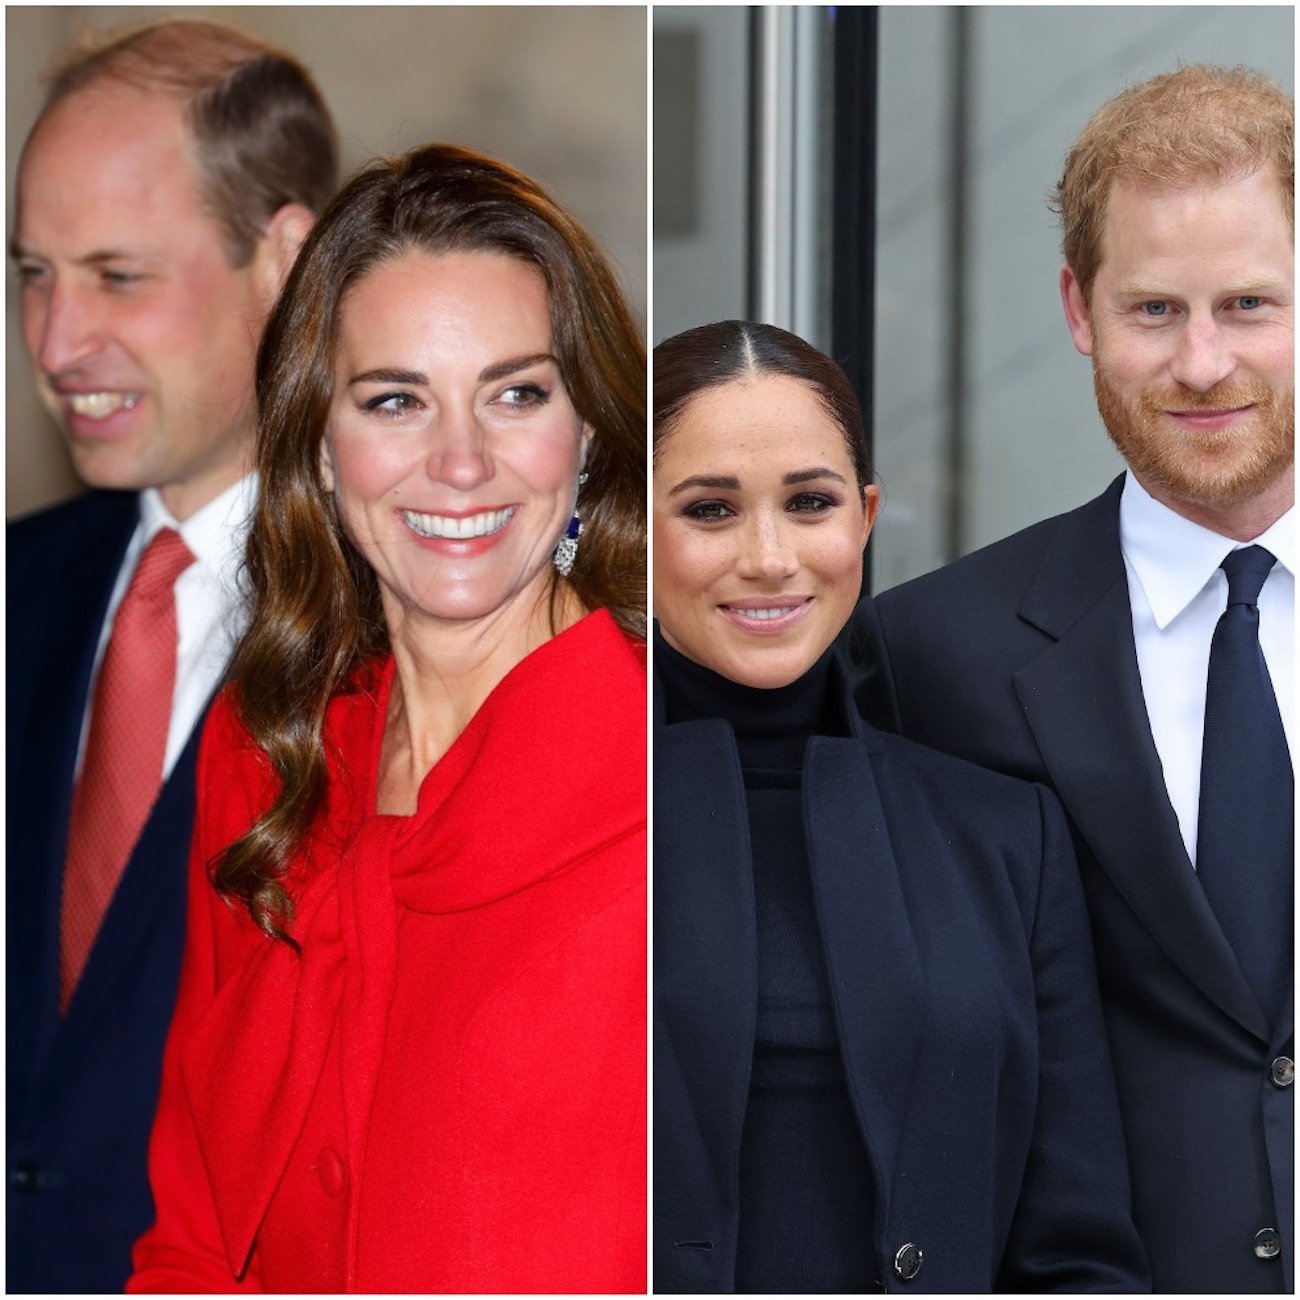 Prince William and Kate Middleton in 2021 and Meghan Markle and Prince Harry in 2021